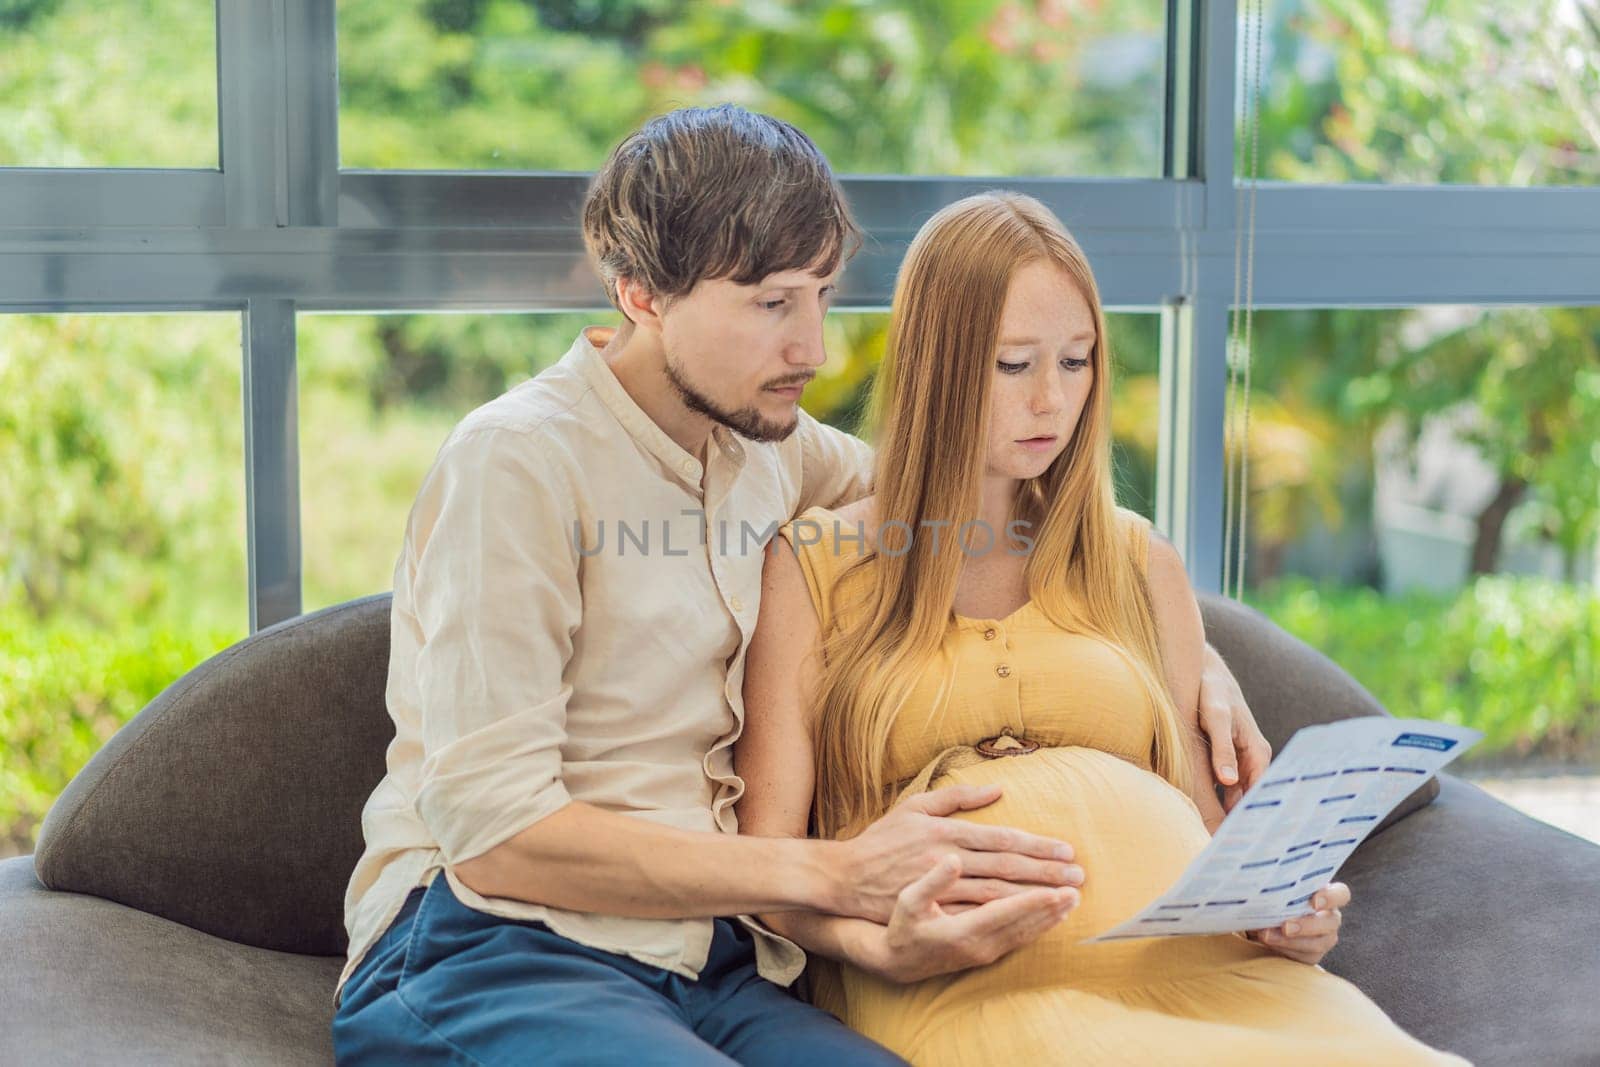 Expectant couple reviews blood test results, navigating pregnancy together with concern and anticipation.